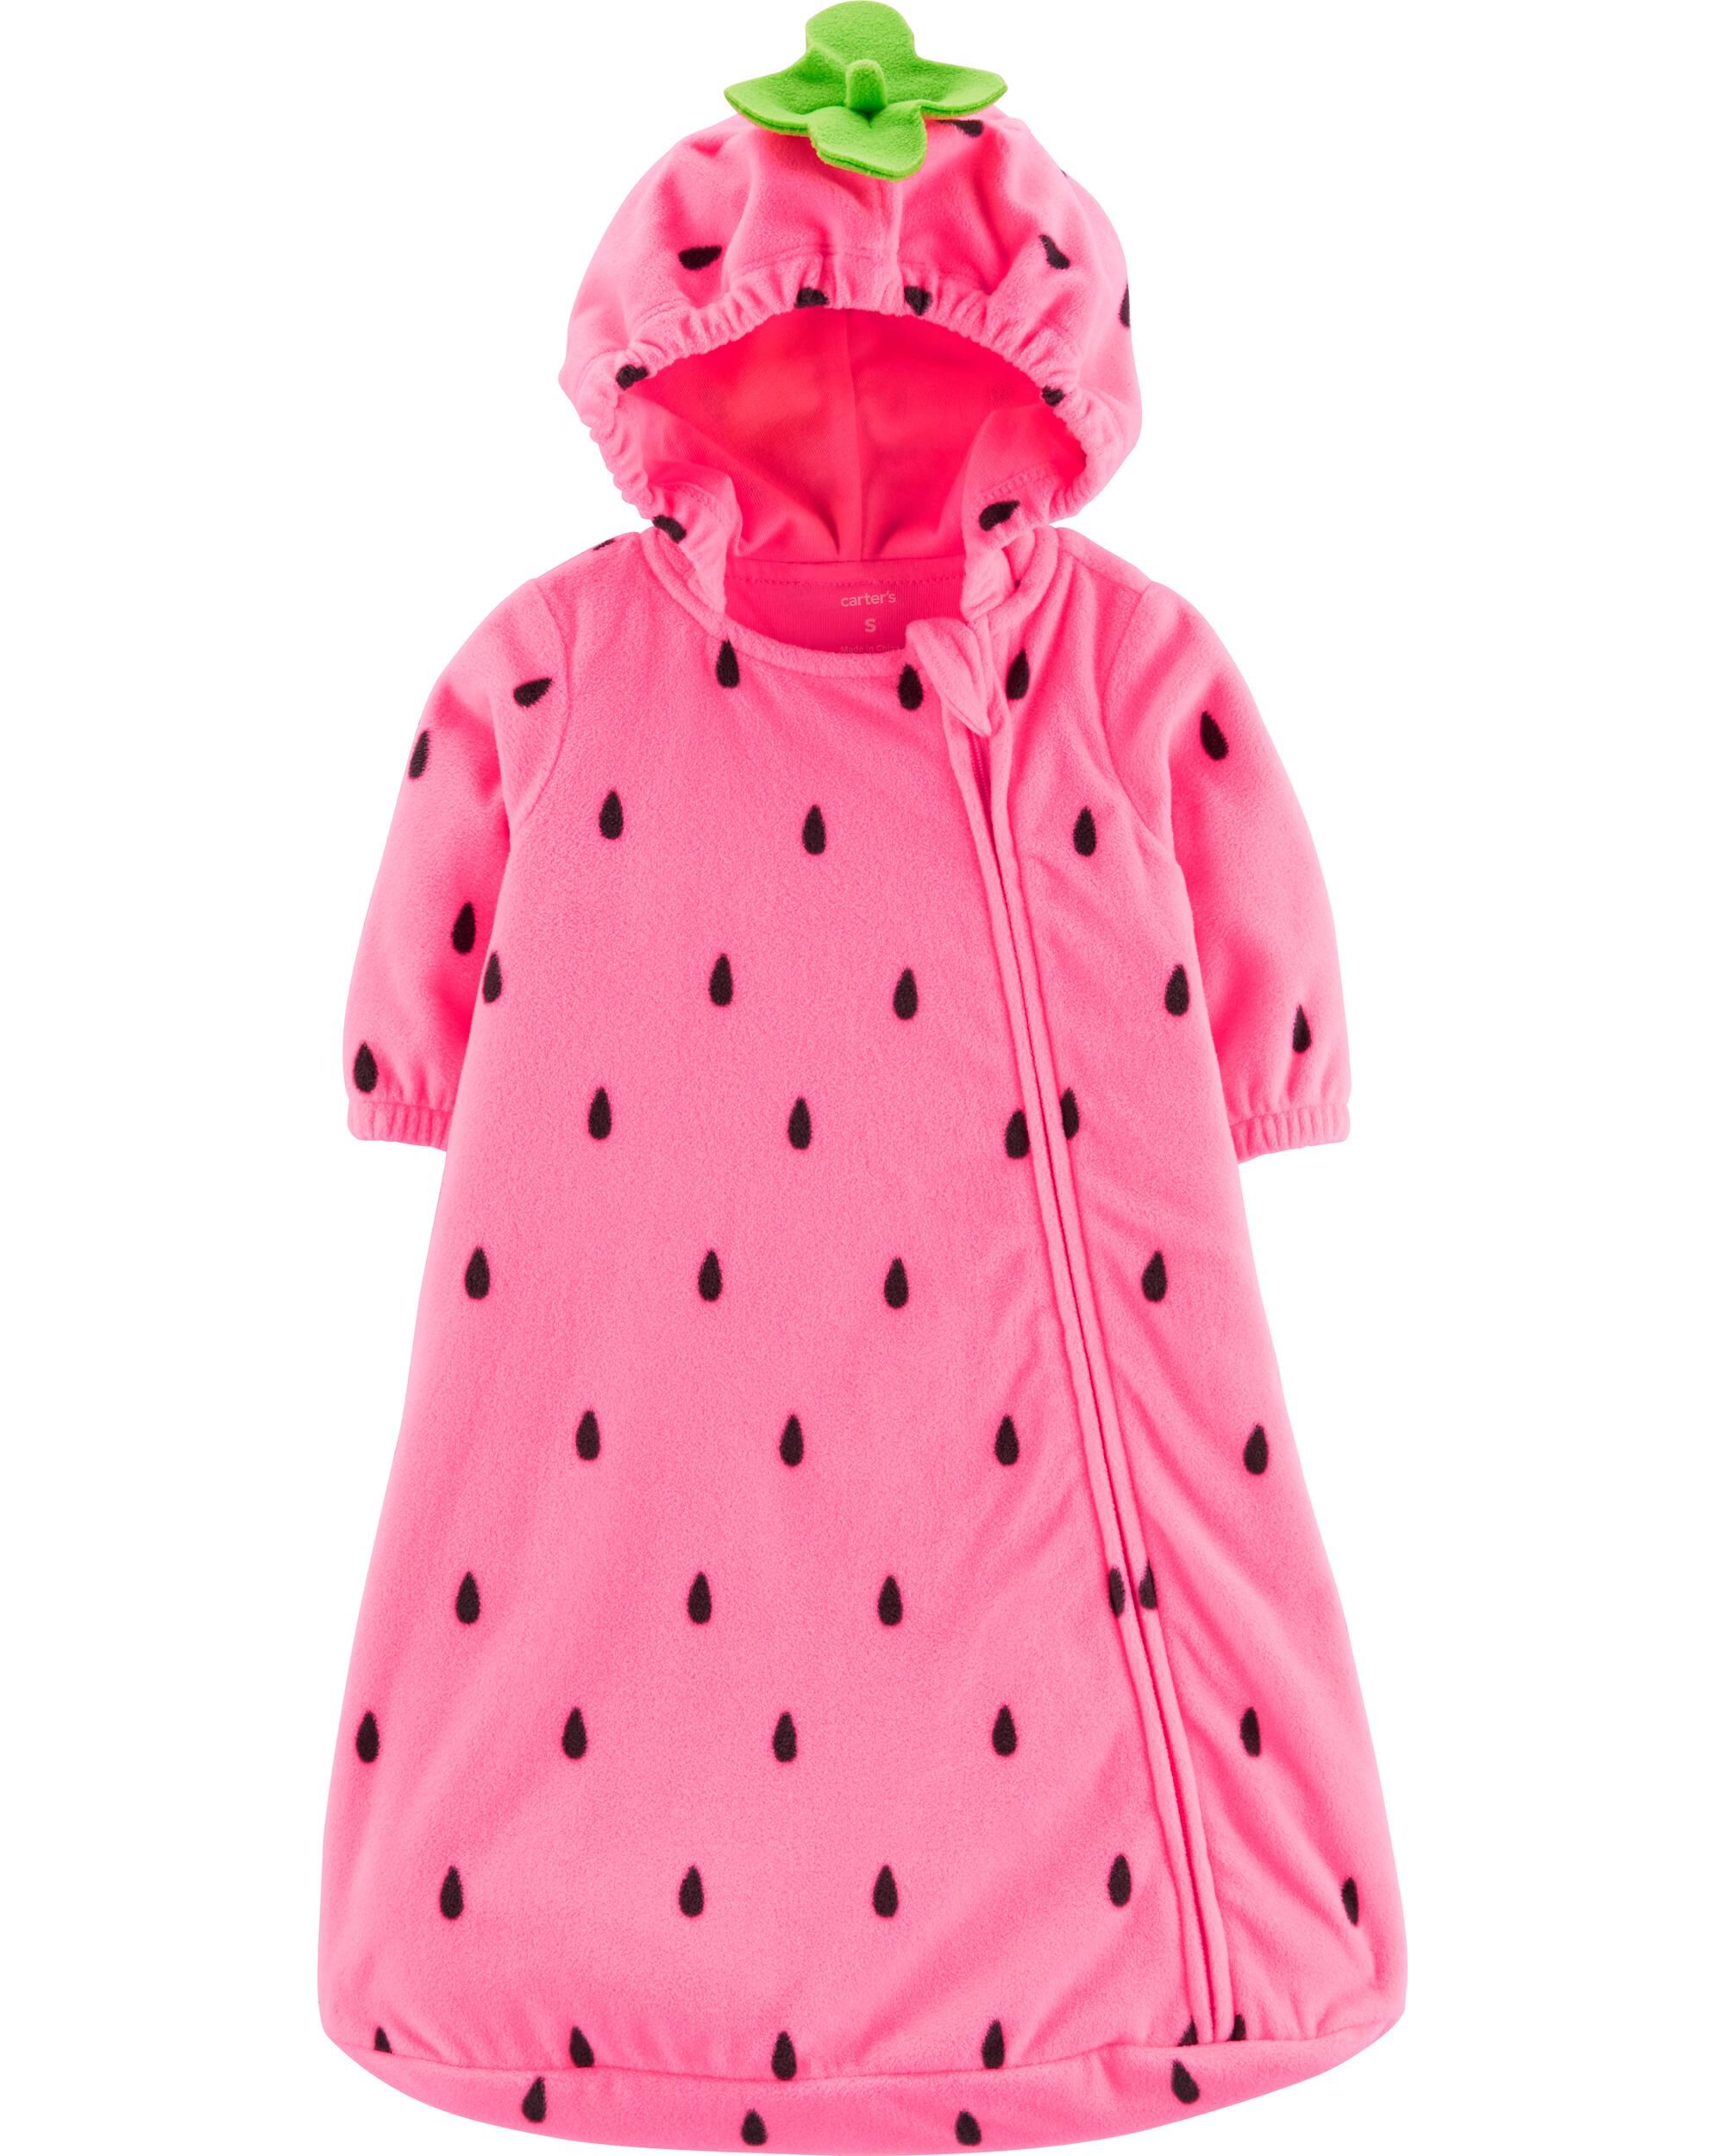 strawberry baby costume carters